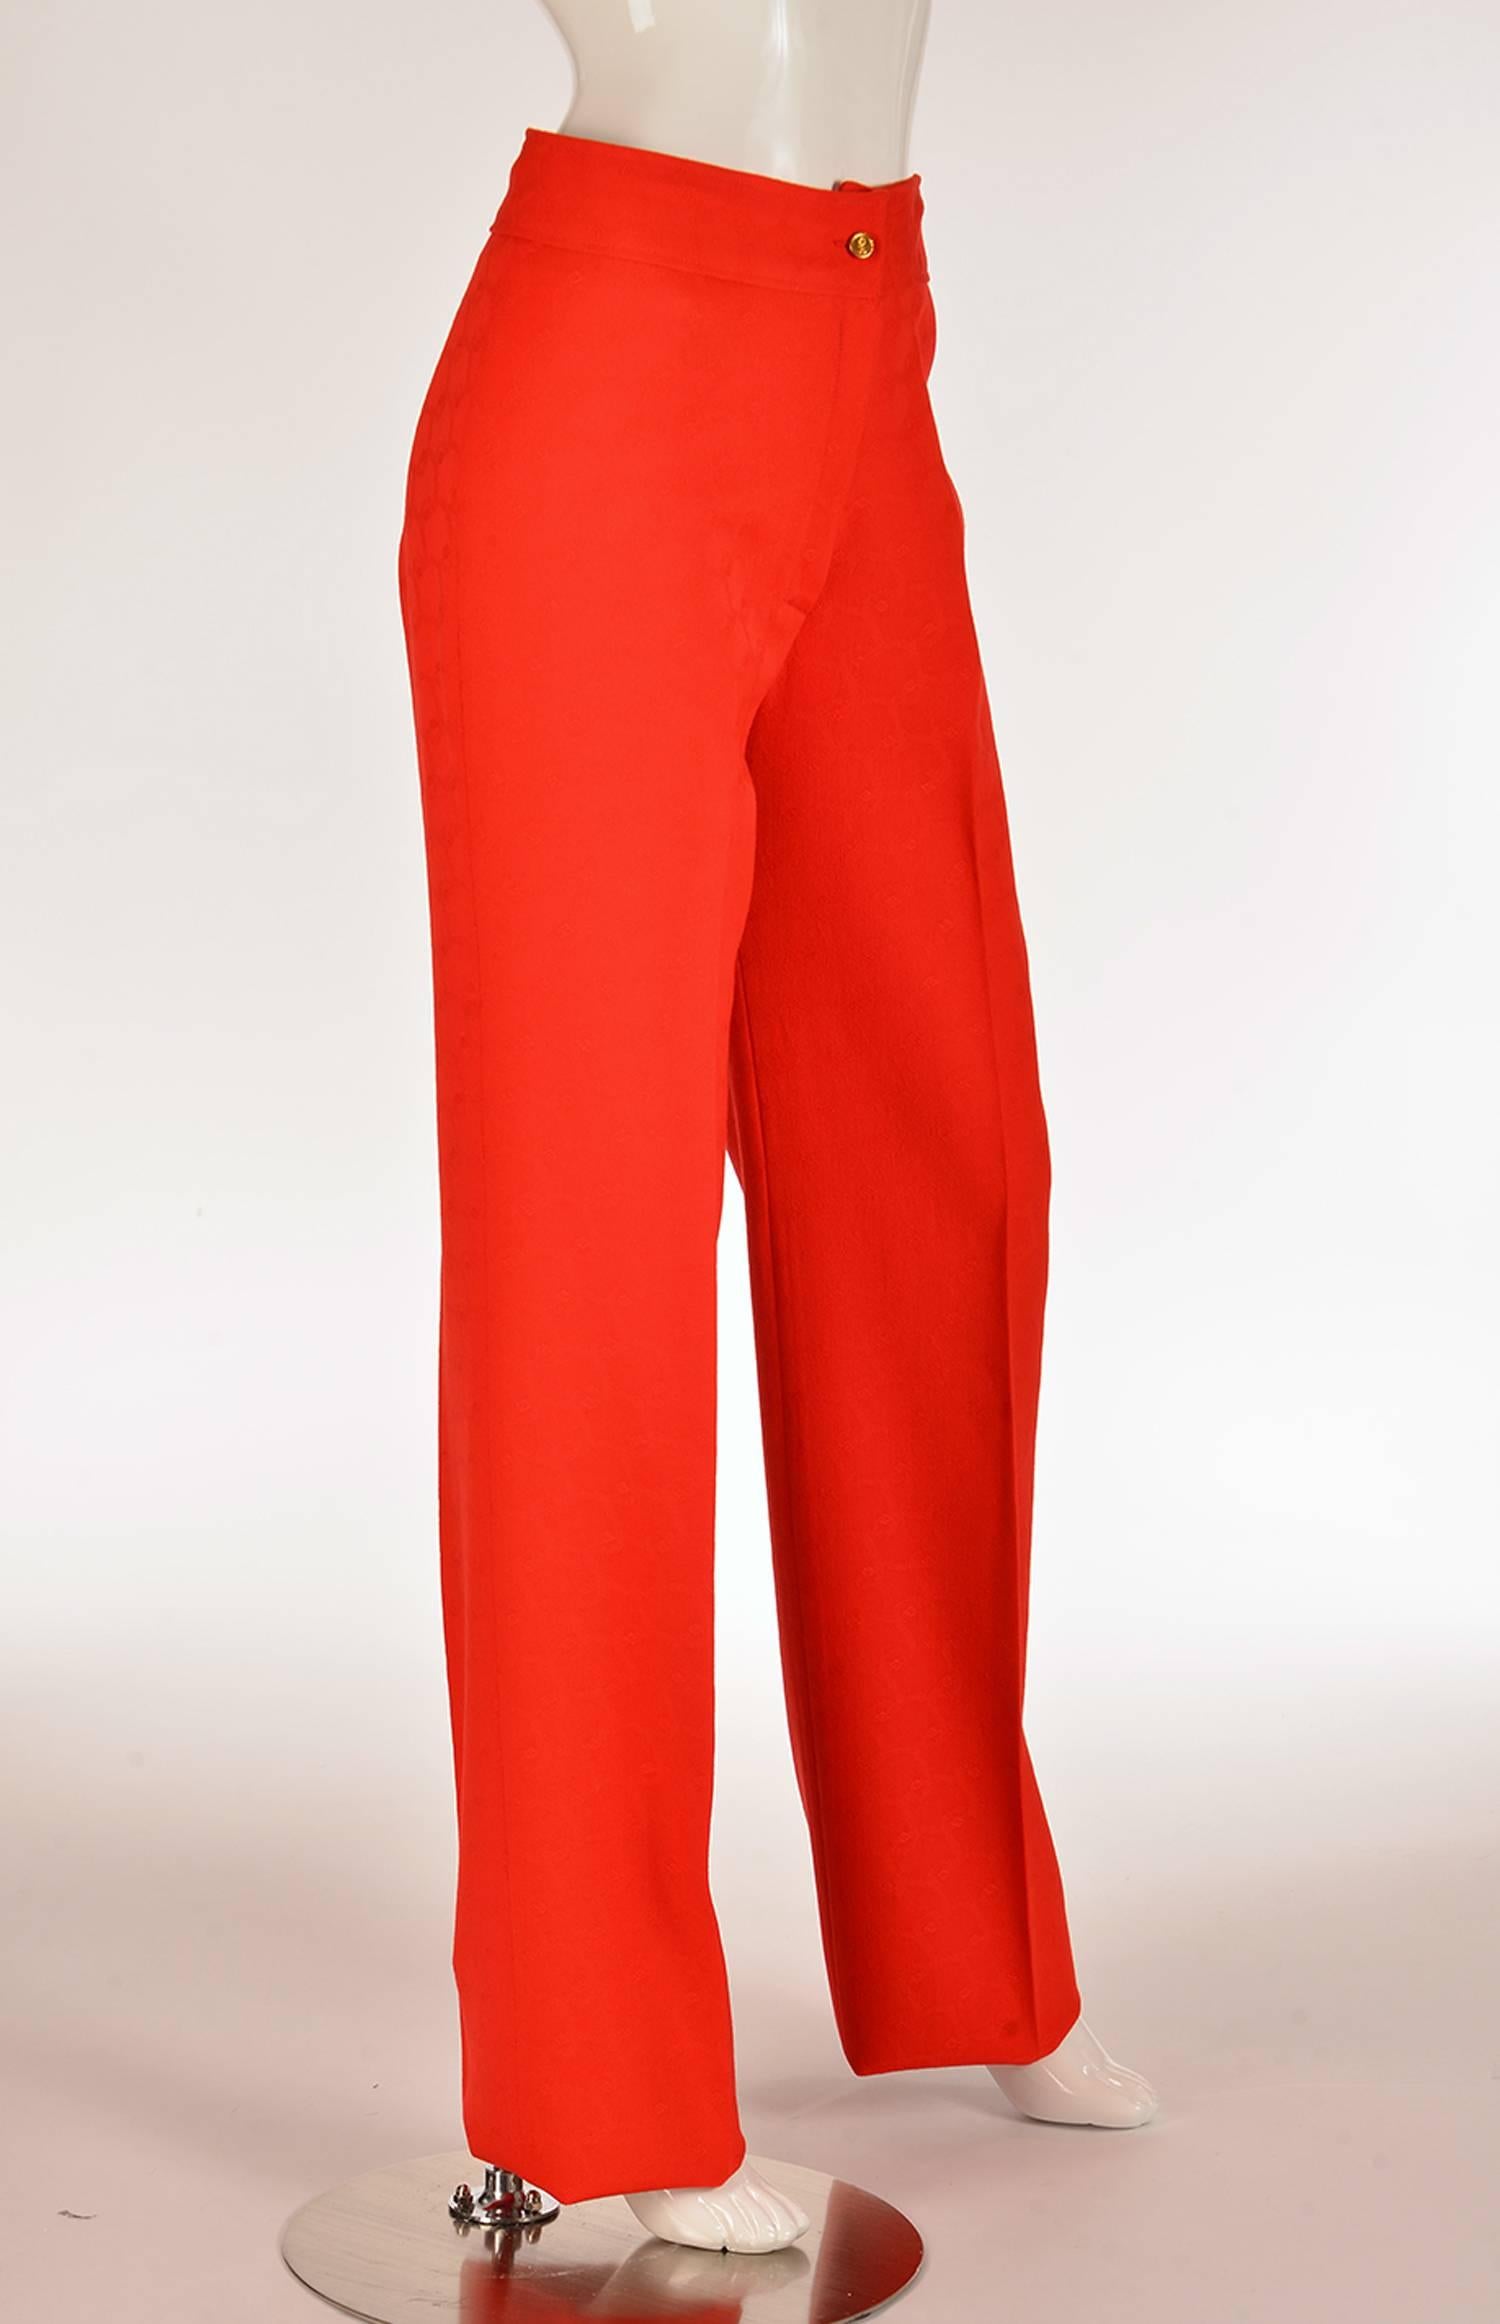 Vintage red wool trousers with Roberta di Camierno signature fabric consisting of buckles and belts printed all over the pants. Flat front. Gold metal button stamped with her logo. Zip front.

Modern Us Size 6-8. See measurements.

*All garments and